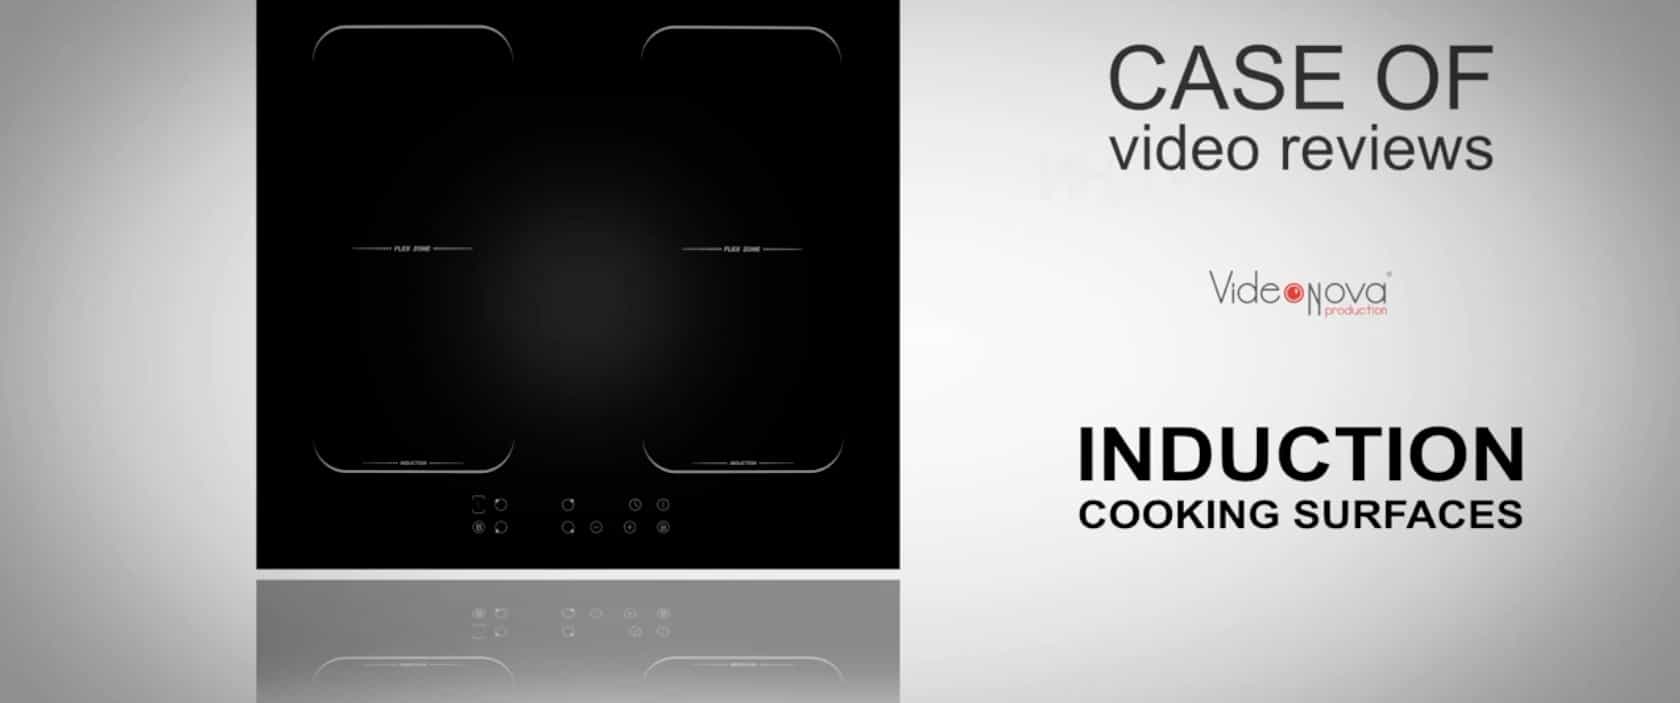 Case video review of large household appliances" Induction surface. Case"